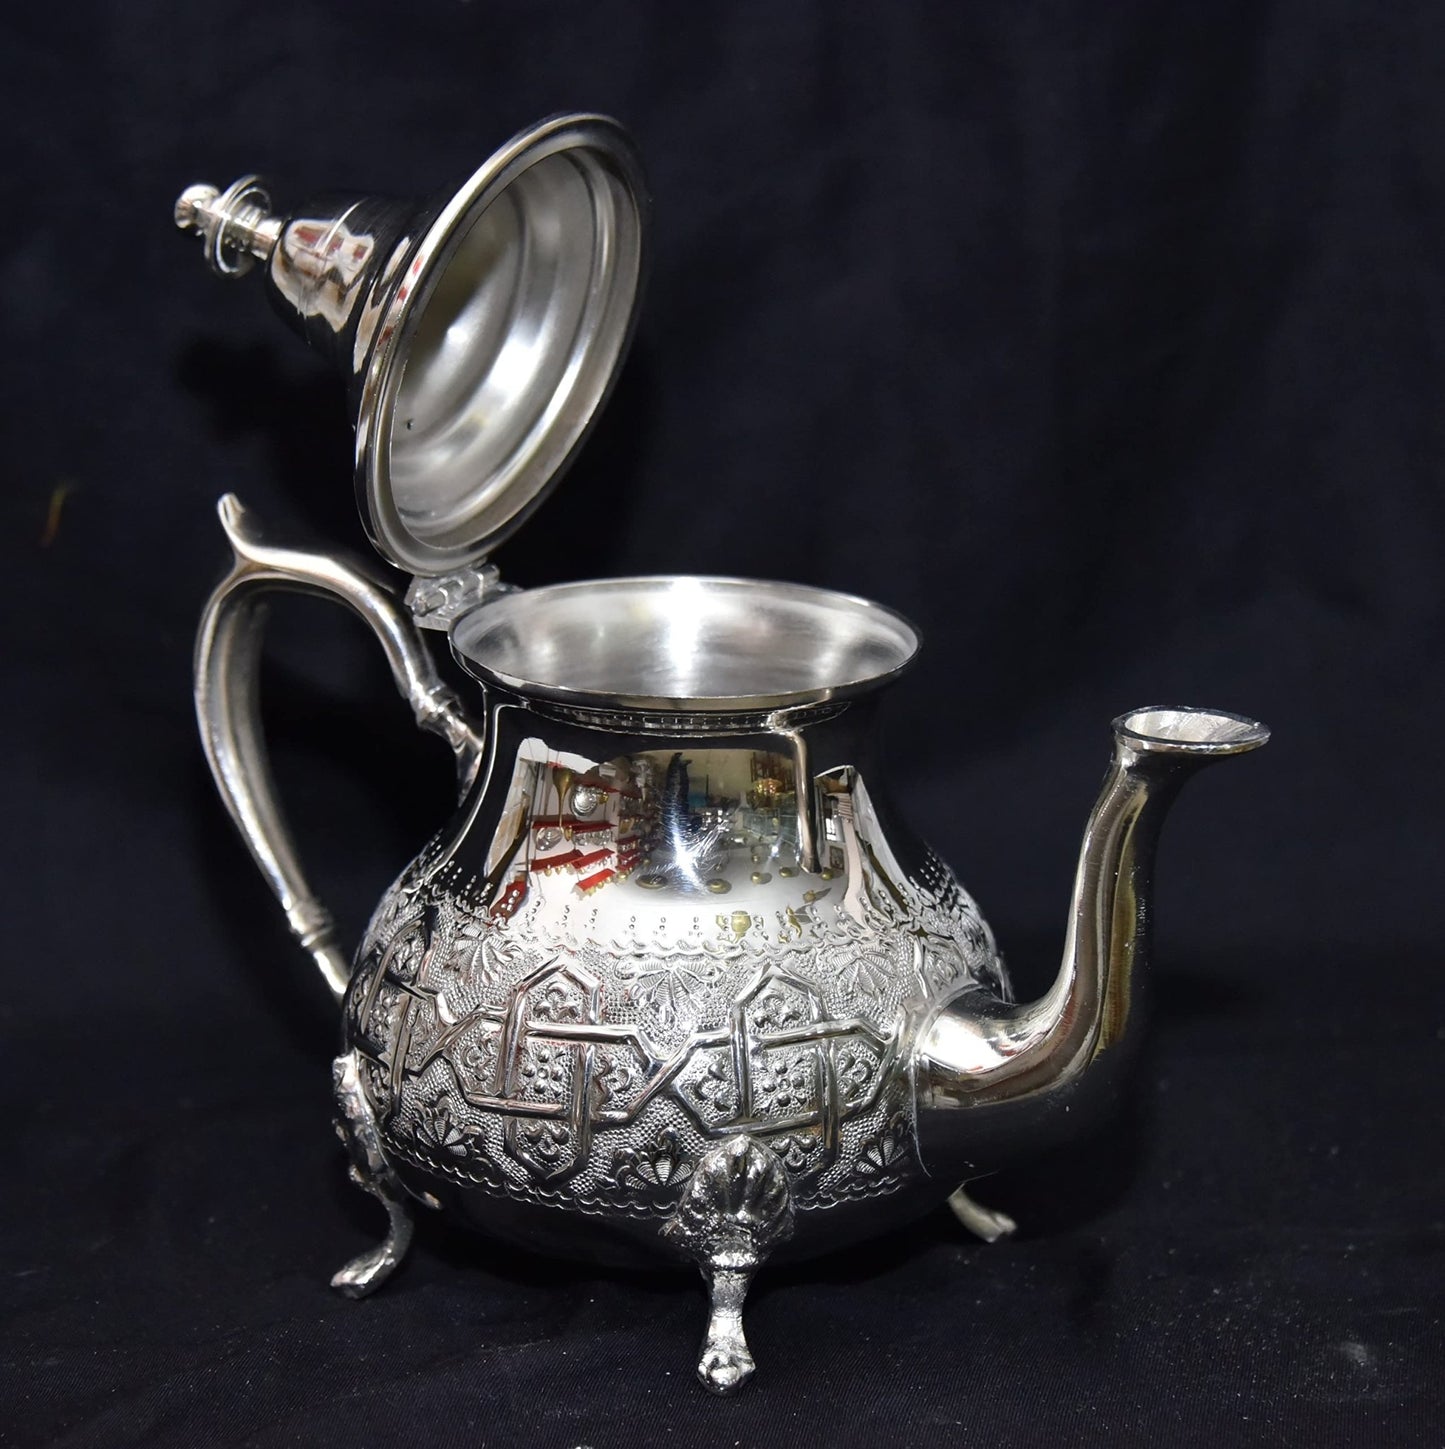 Moroccan 4 Cups Tea Pot W/ 4 Welded Legs Handmade Serving 15OZ Small Brass Silver Plated Teapot Hand Carved in Fez Morocco - Handmade by My Poufs